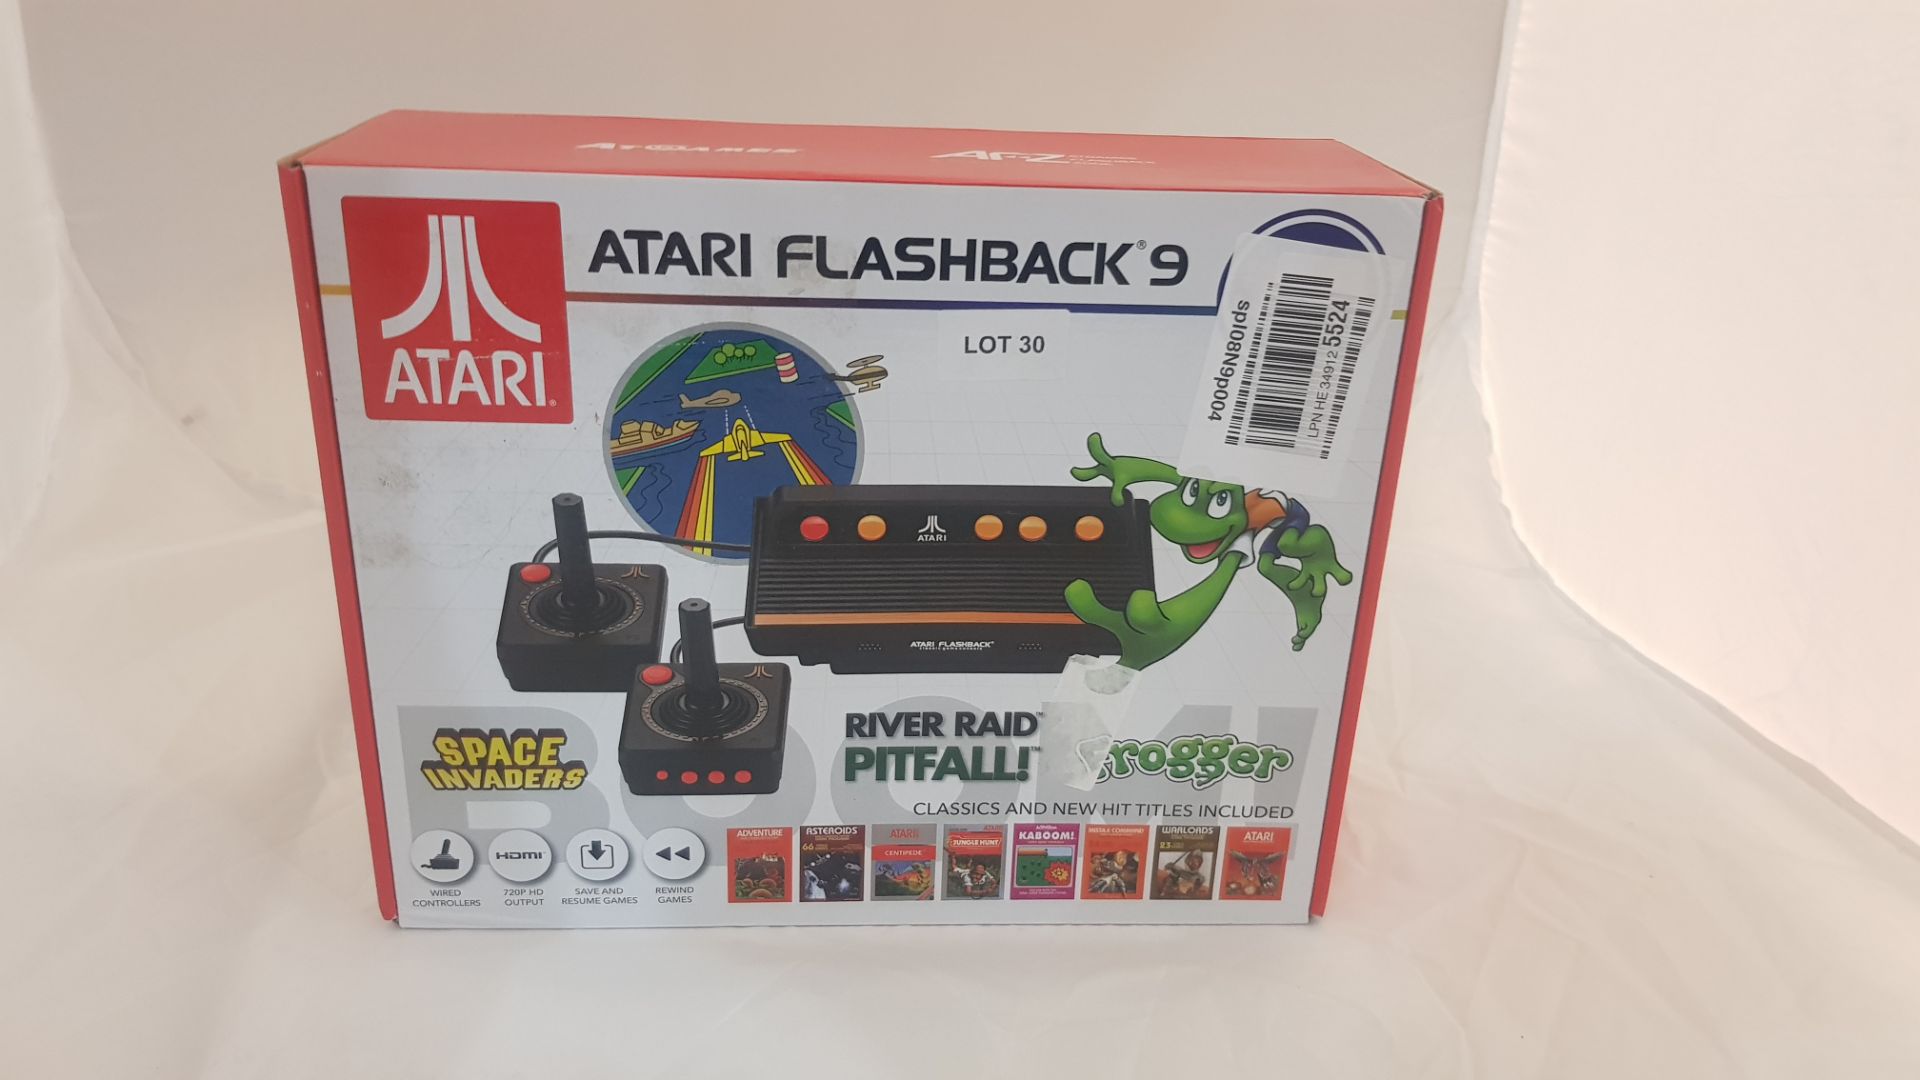 Atari Flashback 9 Games Console - 110 Built In Games. (RRP £85) Tested Ð Appears To Operate ... - Image 2 of 3